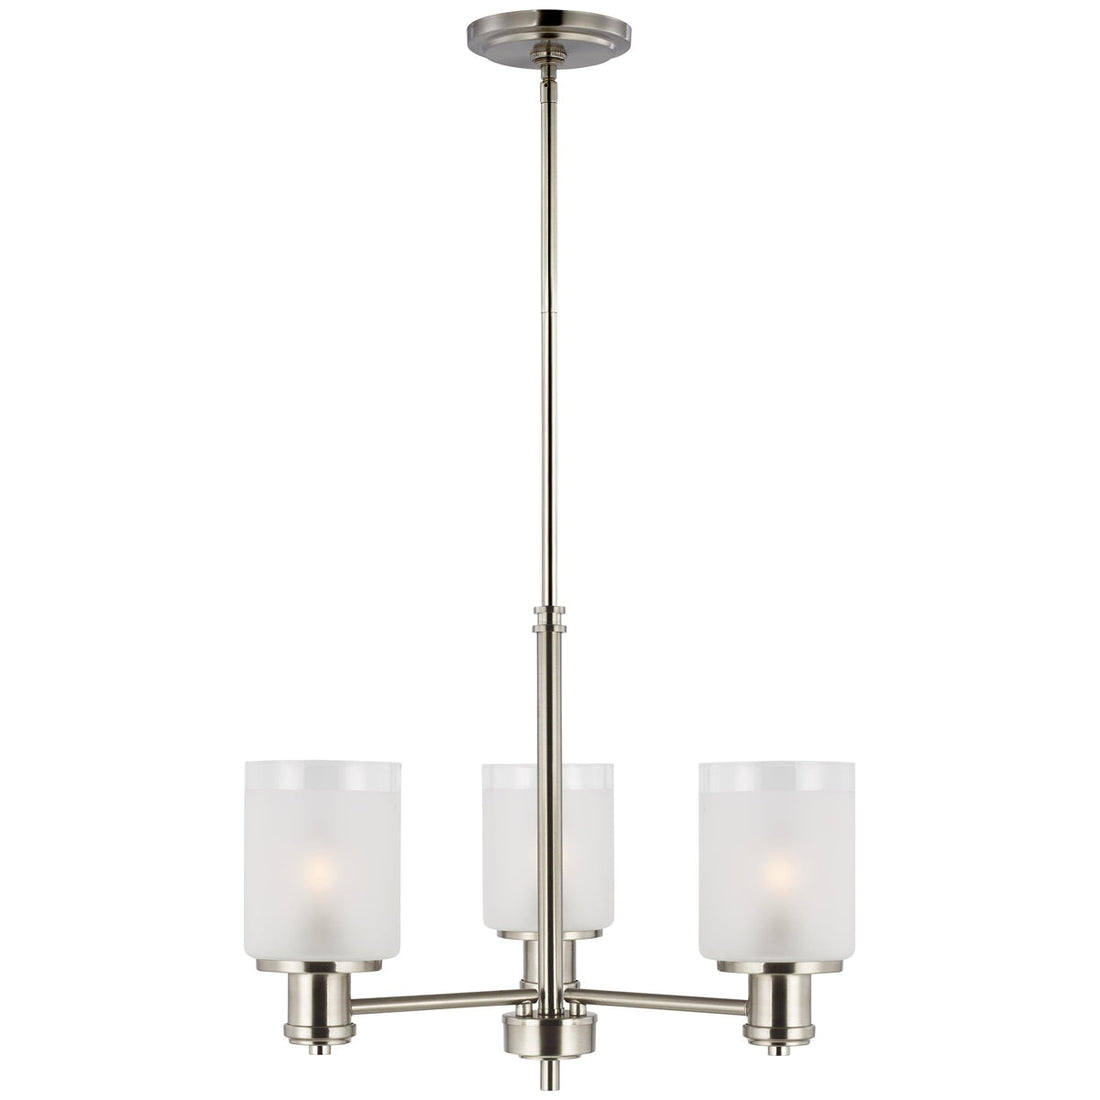 Sea Gull Lighting Norwood 3-Light Chandelier without Bulb